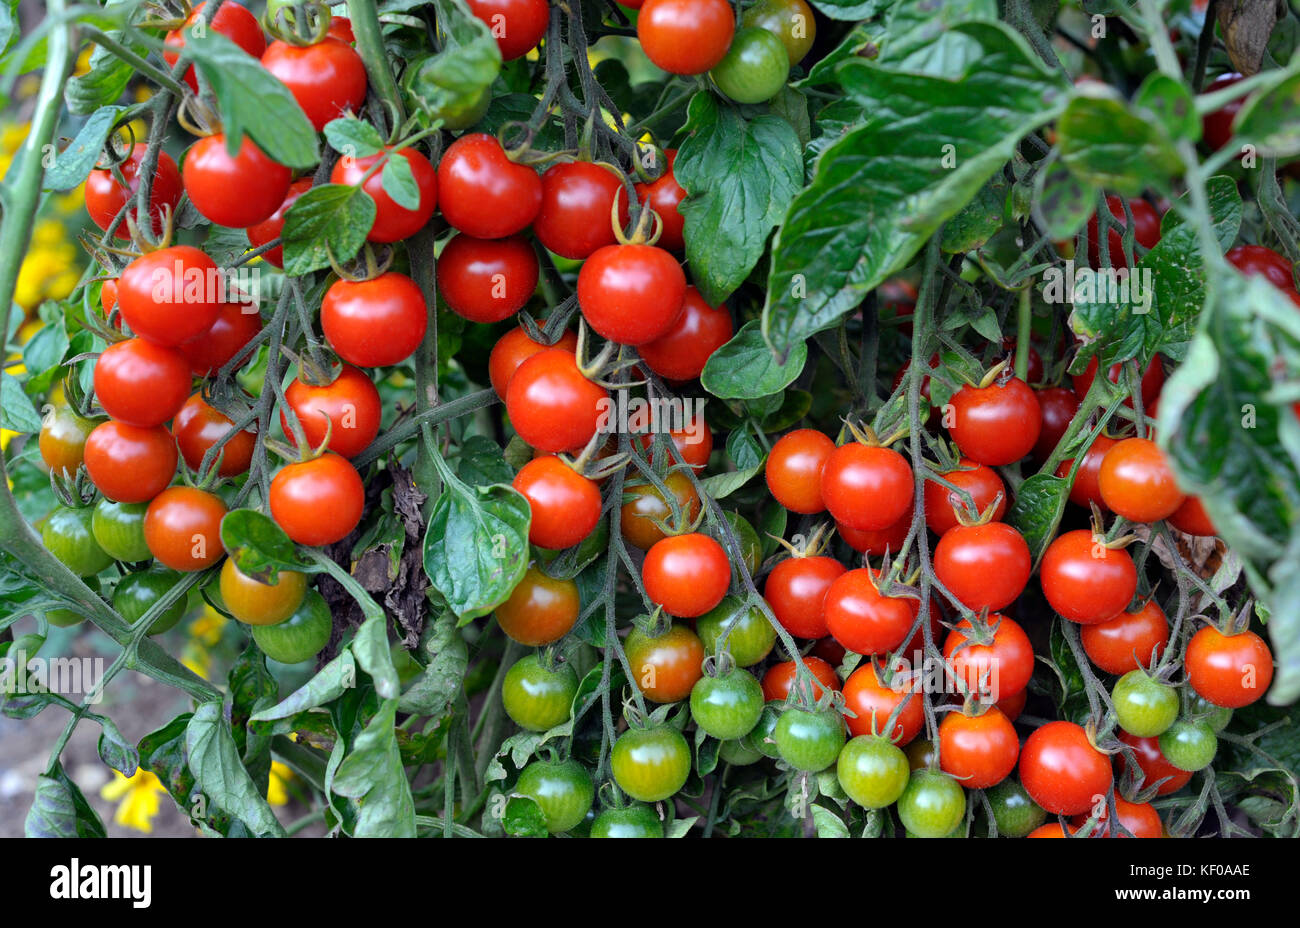 Outdoor grown Cherry tomatoes, F1 Sweet Million, ripening on the vine in a garden. Stock Photo